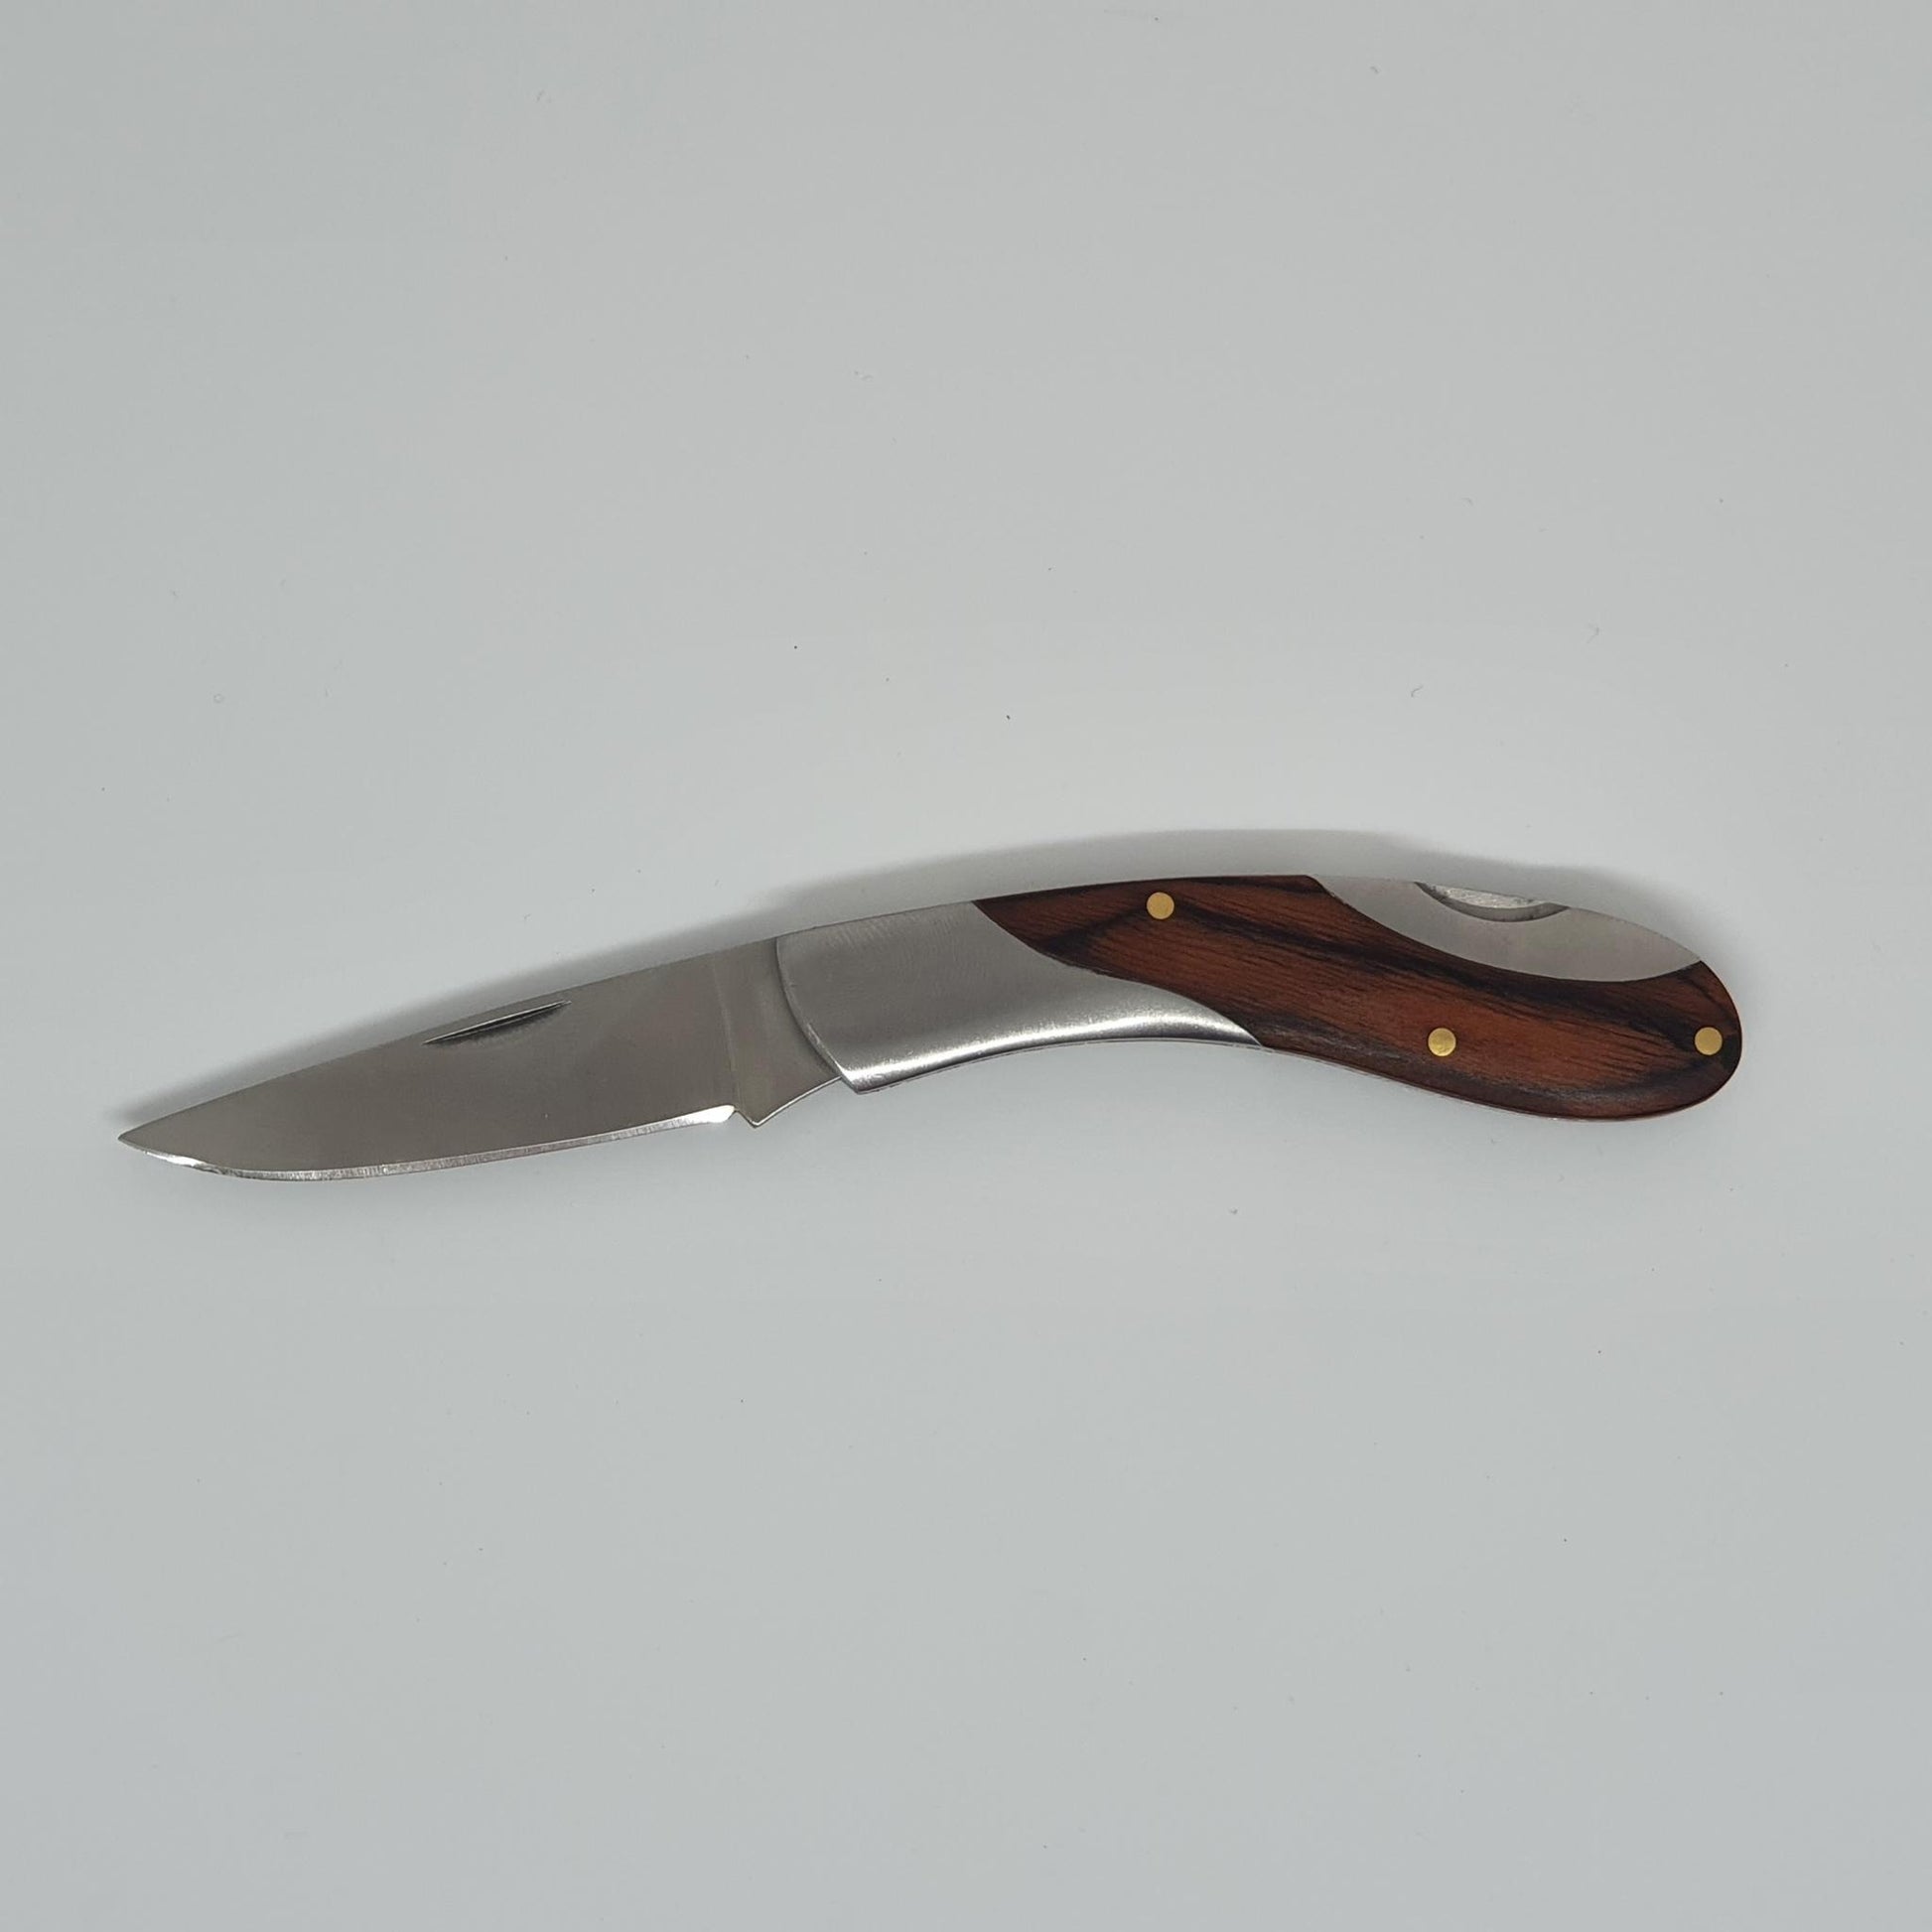 Stainless steel folding blade Stainless steel handle with wood inlay